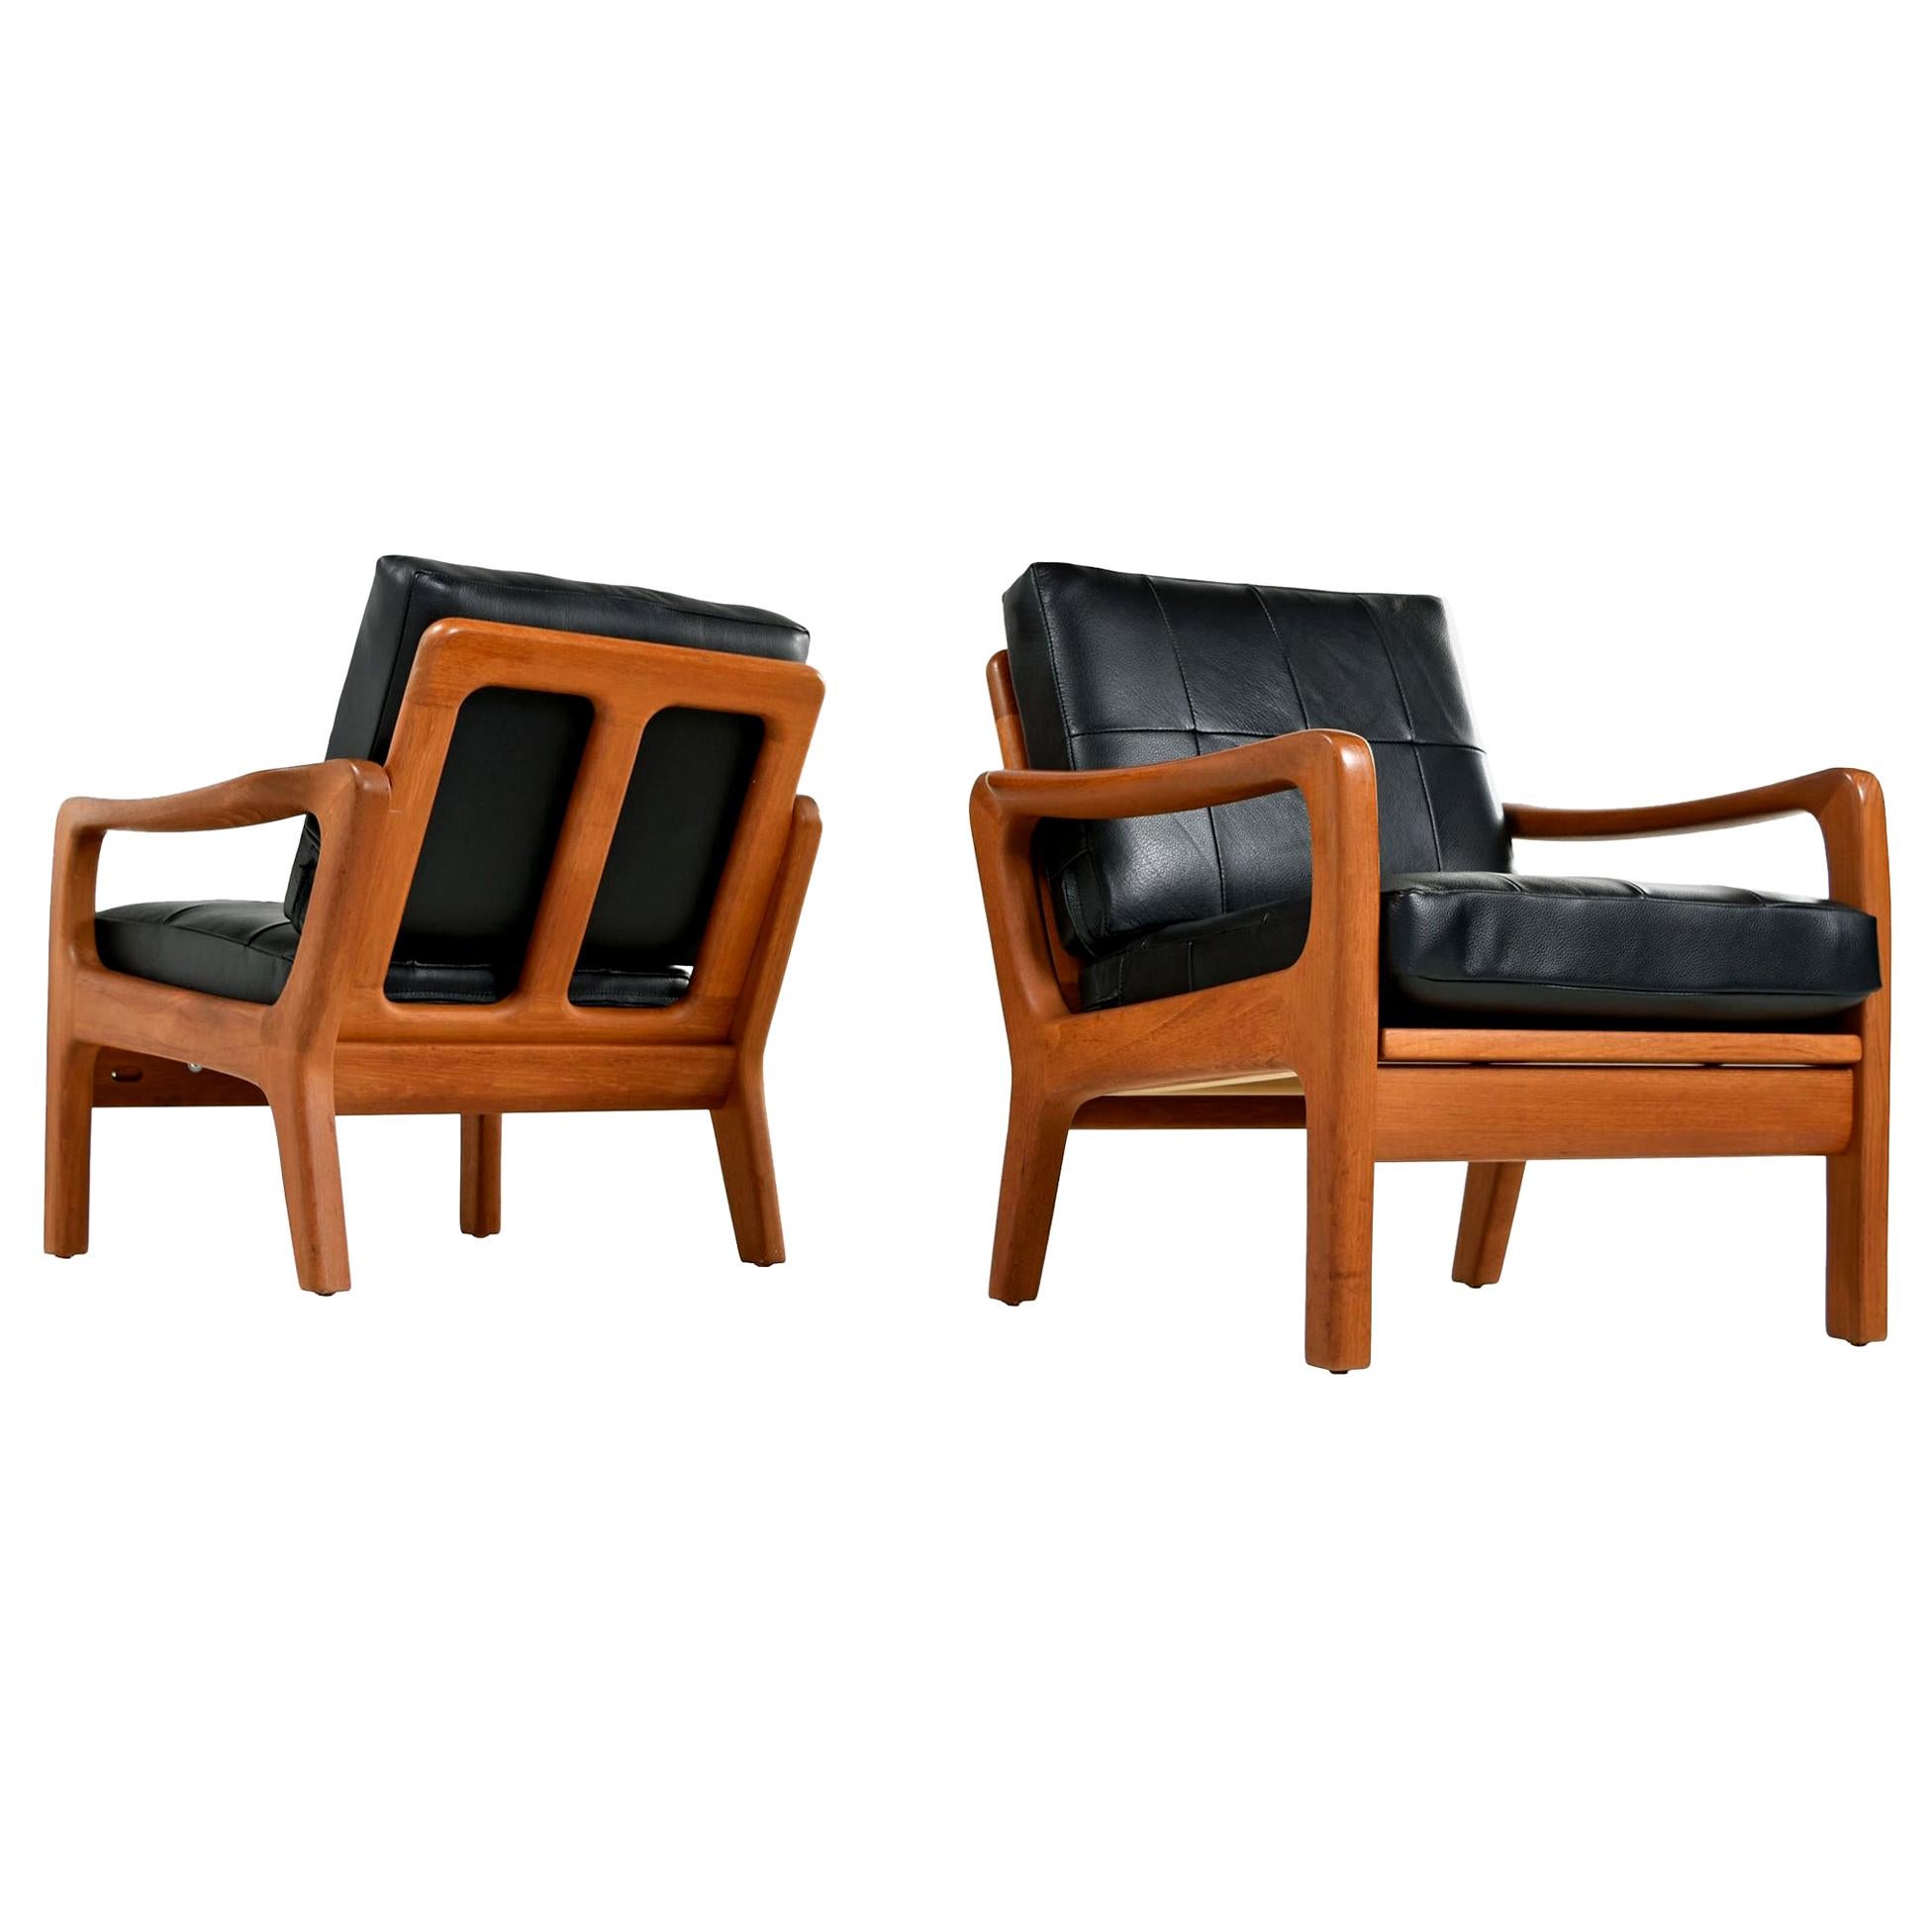 Pair of stunning Juul Kristensen Danish teak lounge chairs with solid teak frames. Fully restored with rock solid rigid construction. The broad, sculpted arms stand out within the sleek, Minimalist, modern, low profile design. Brand new black